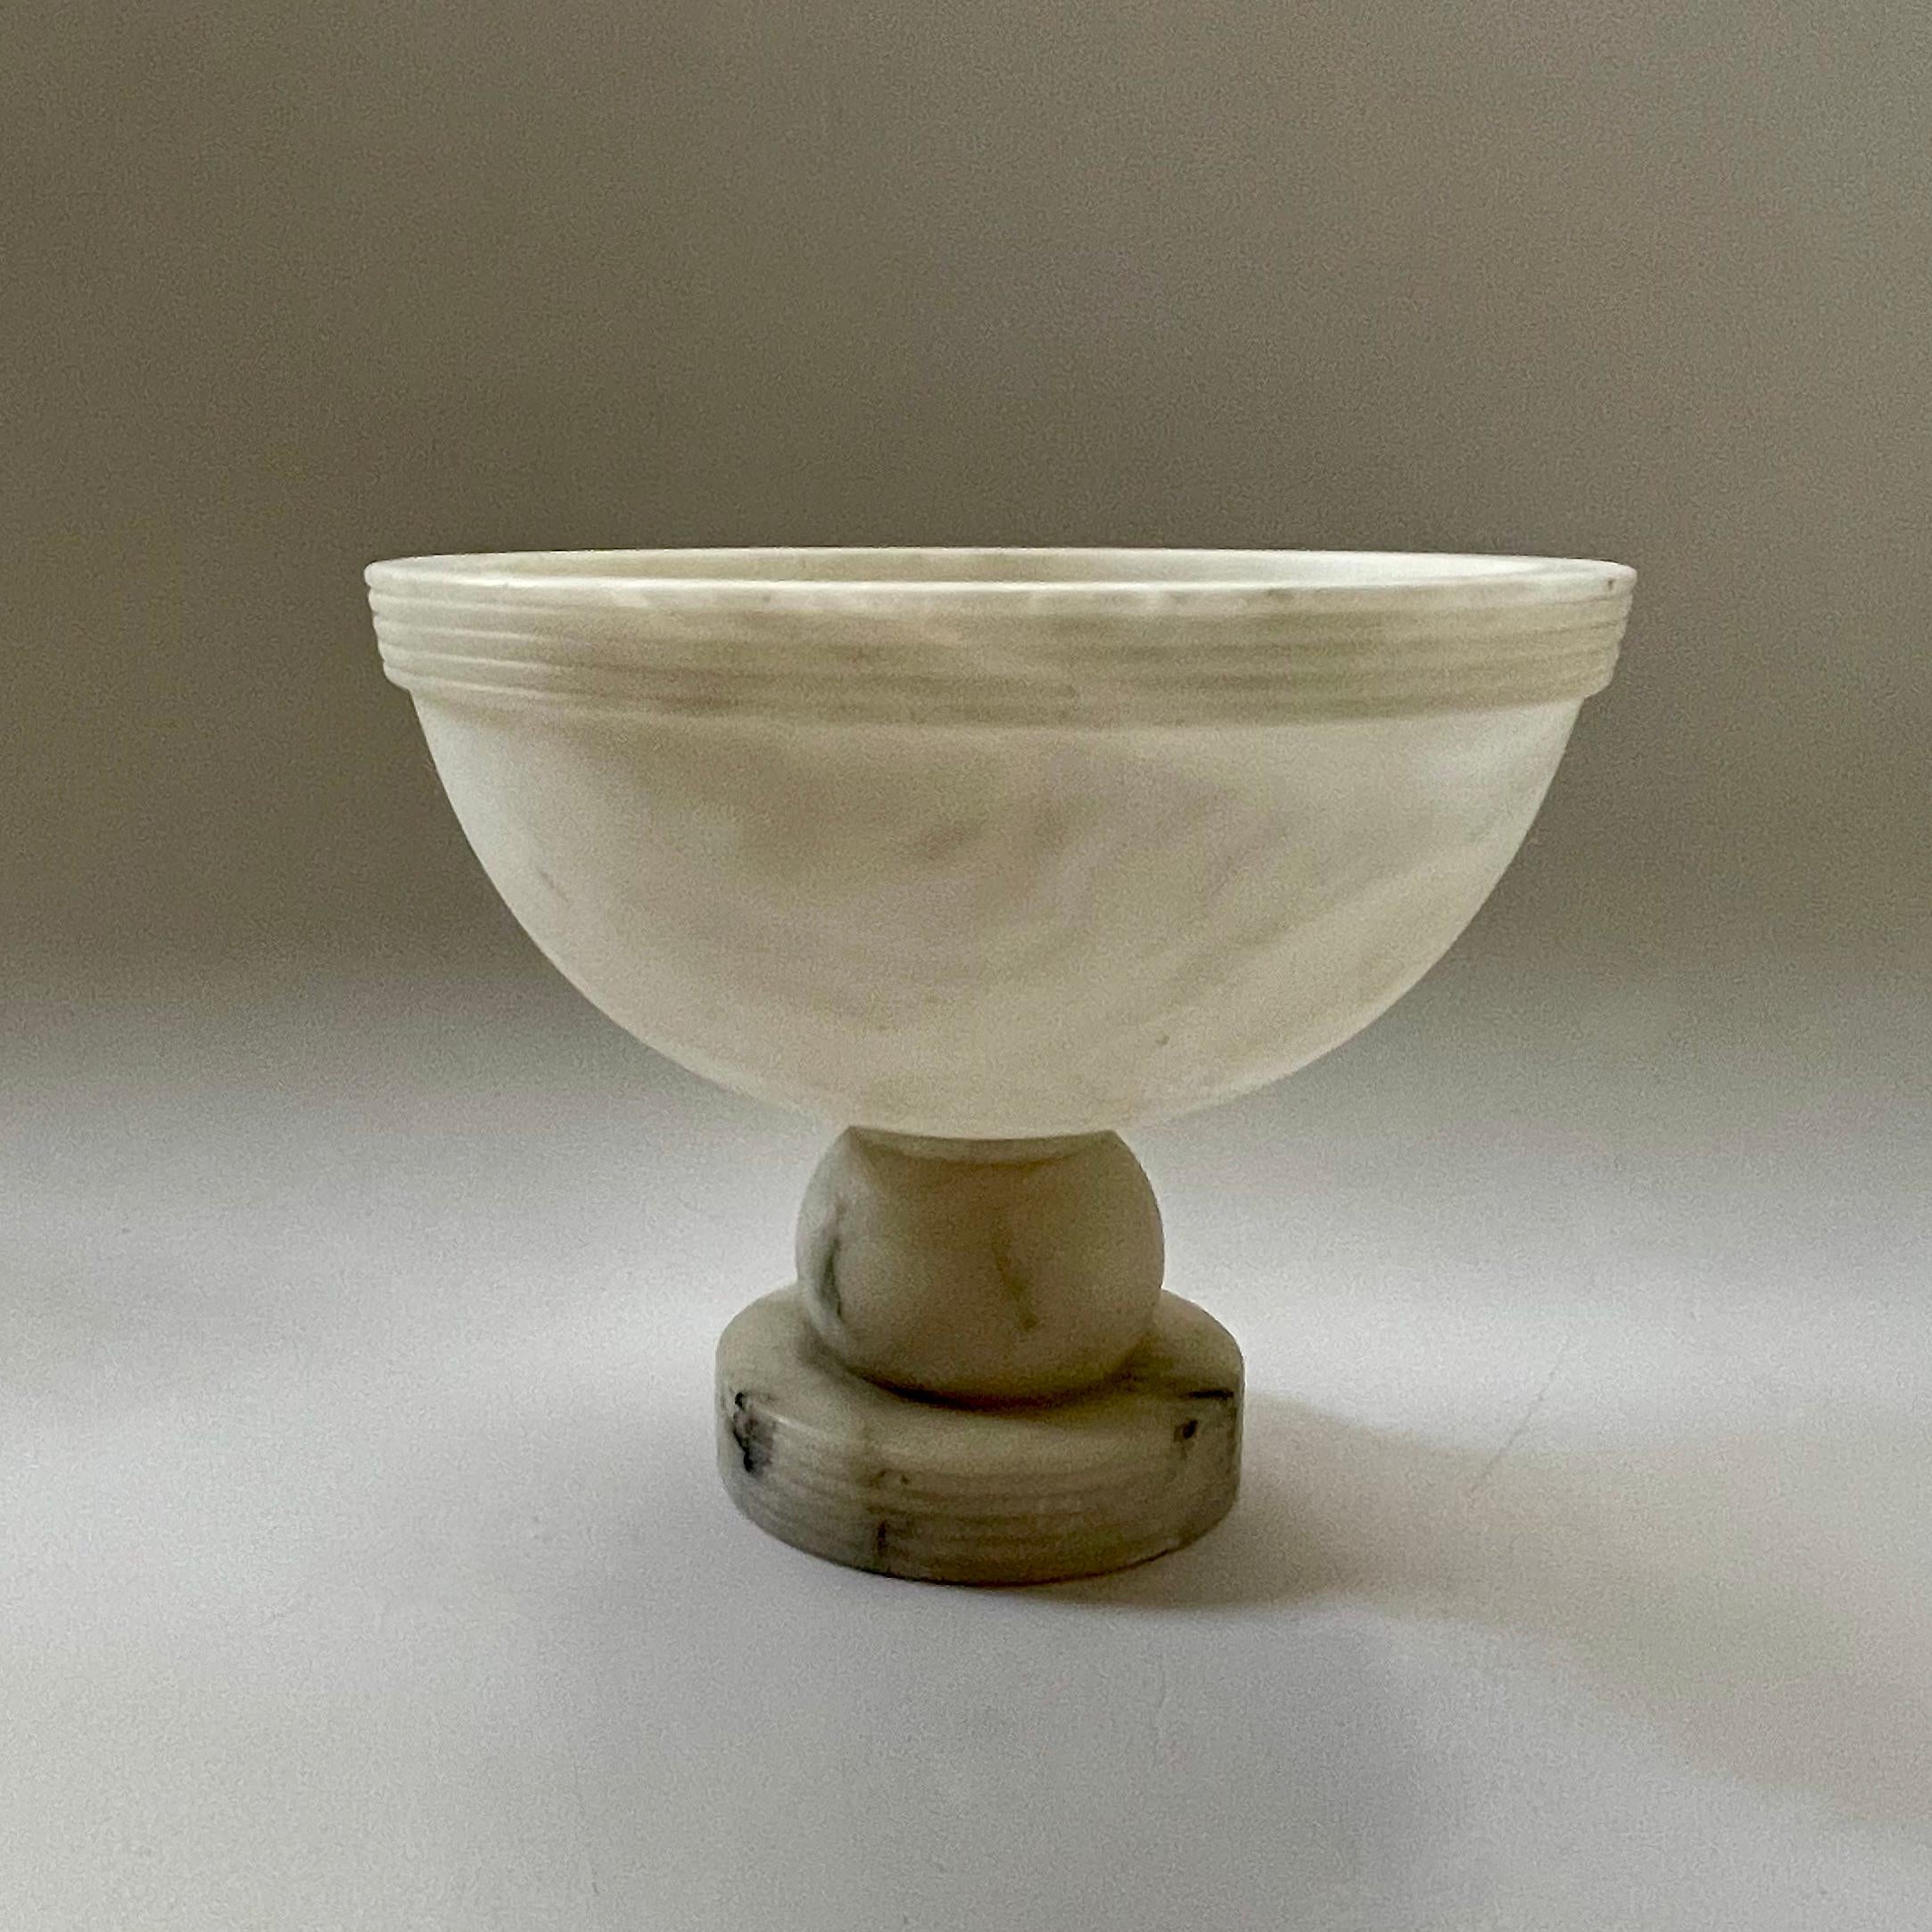 A beautiful and minimal 1930s French Art Deco alabaster centrepiece, consisting of carved alabaster forming a pedestal bowl. Raised reeding is stacked, ringing the top of the bowl and matching the round plinth base. A spherical pedestal holds up the